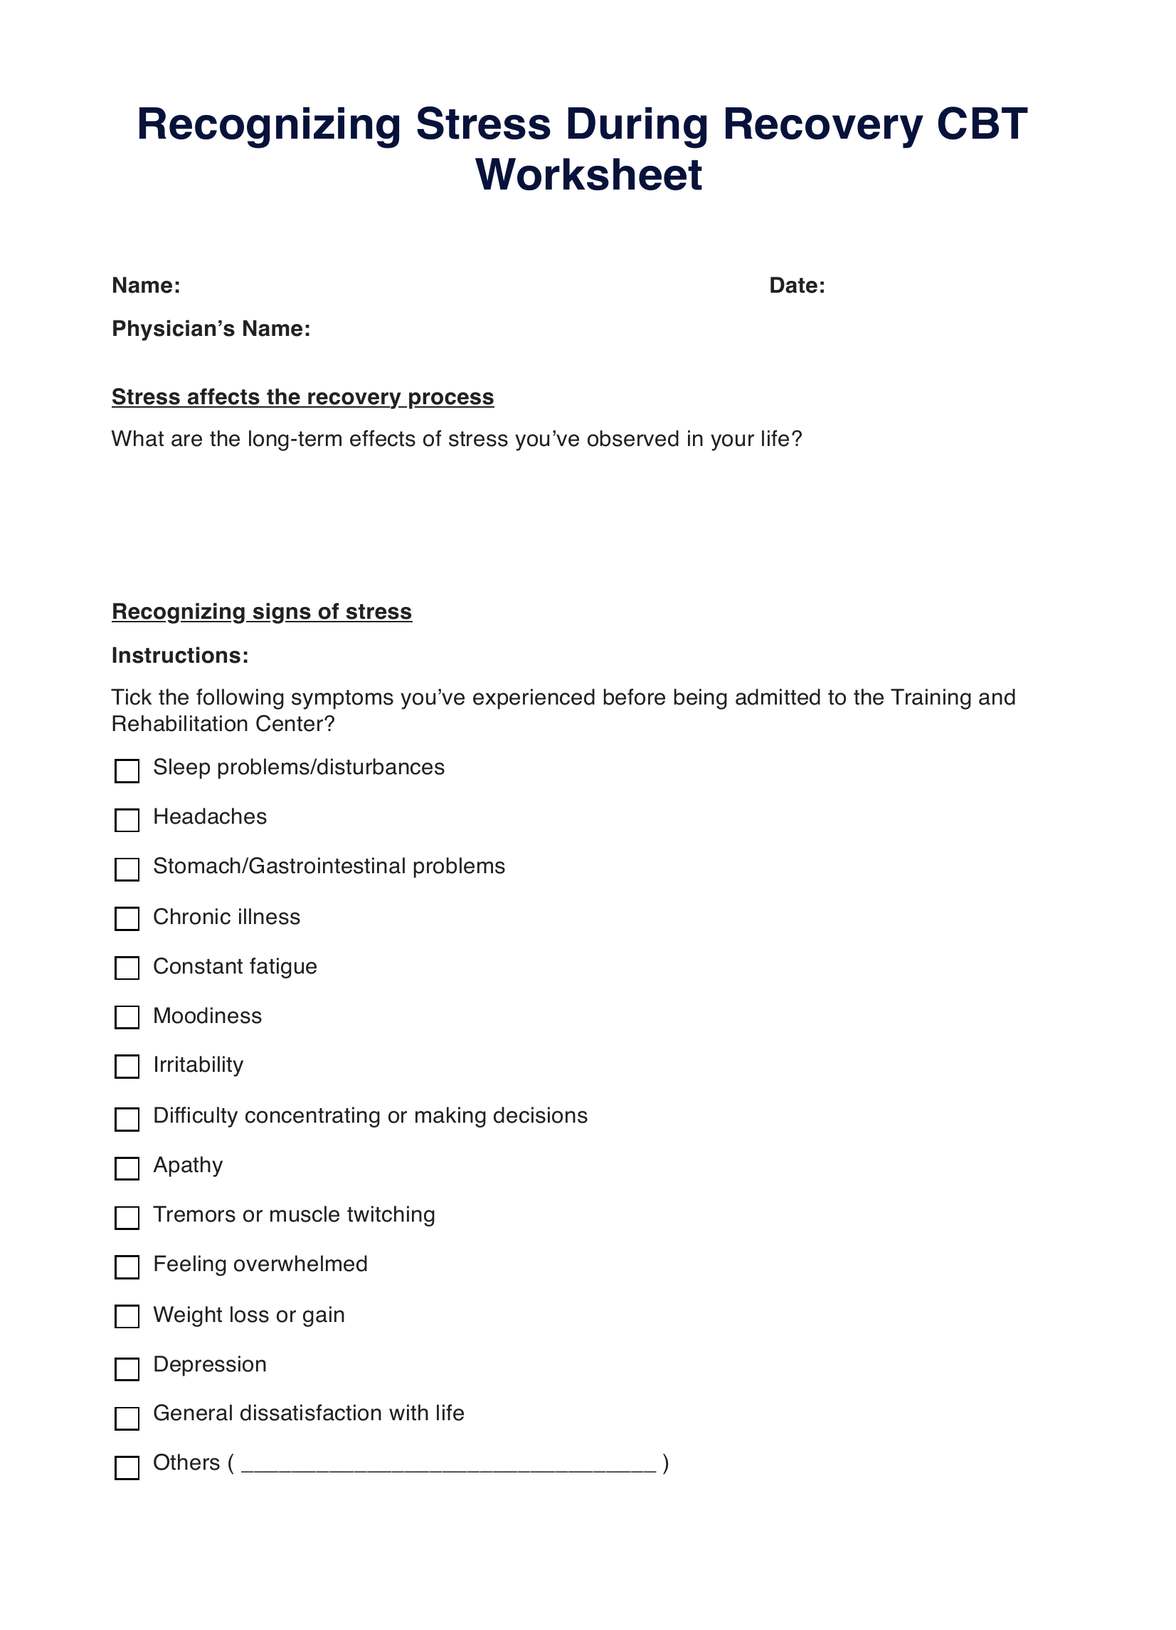 Recognizing Stress During Recovery CBT Worksheet PDF Example